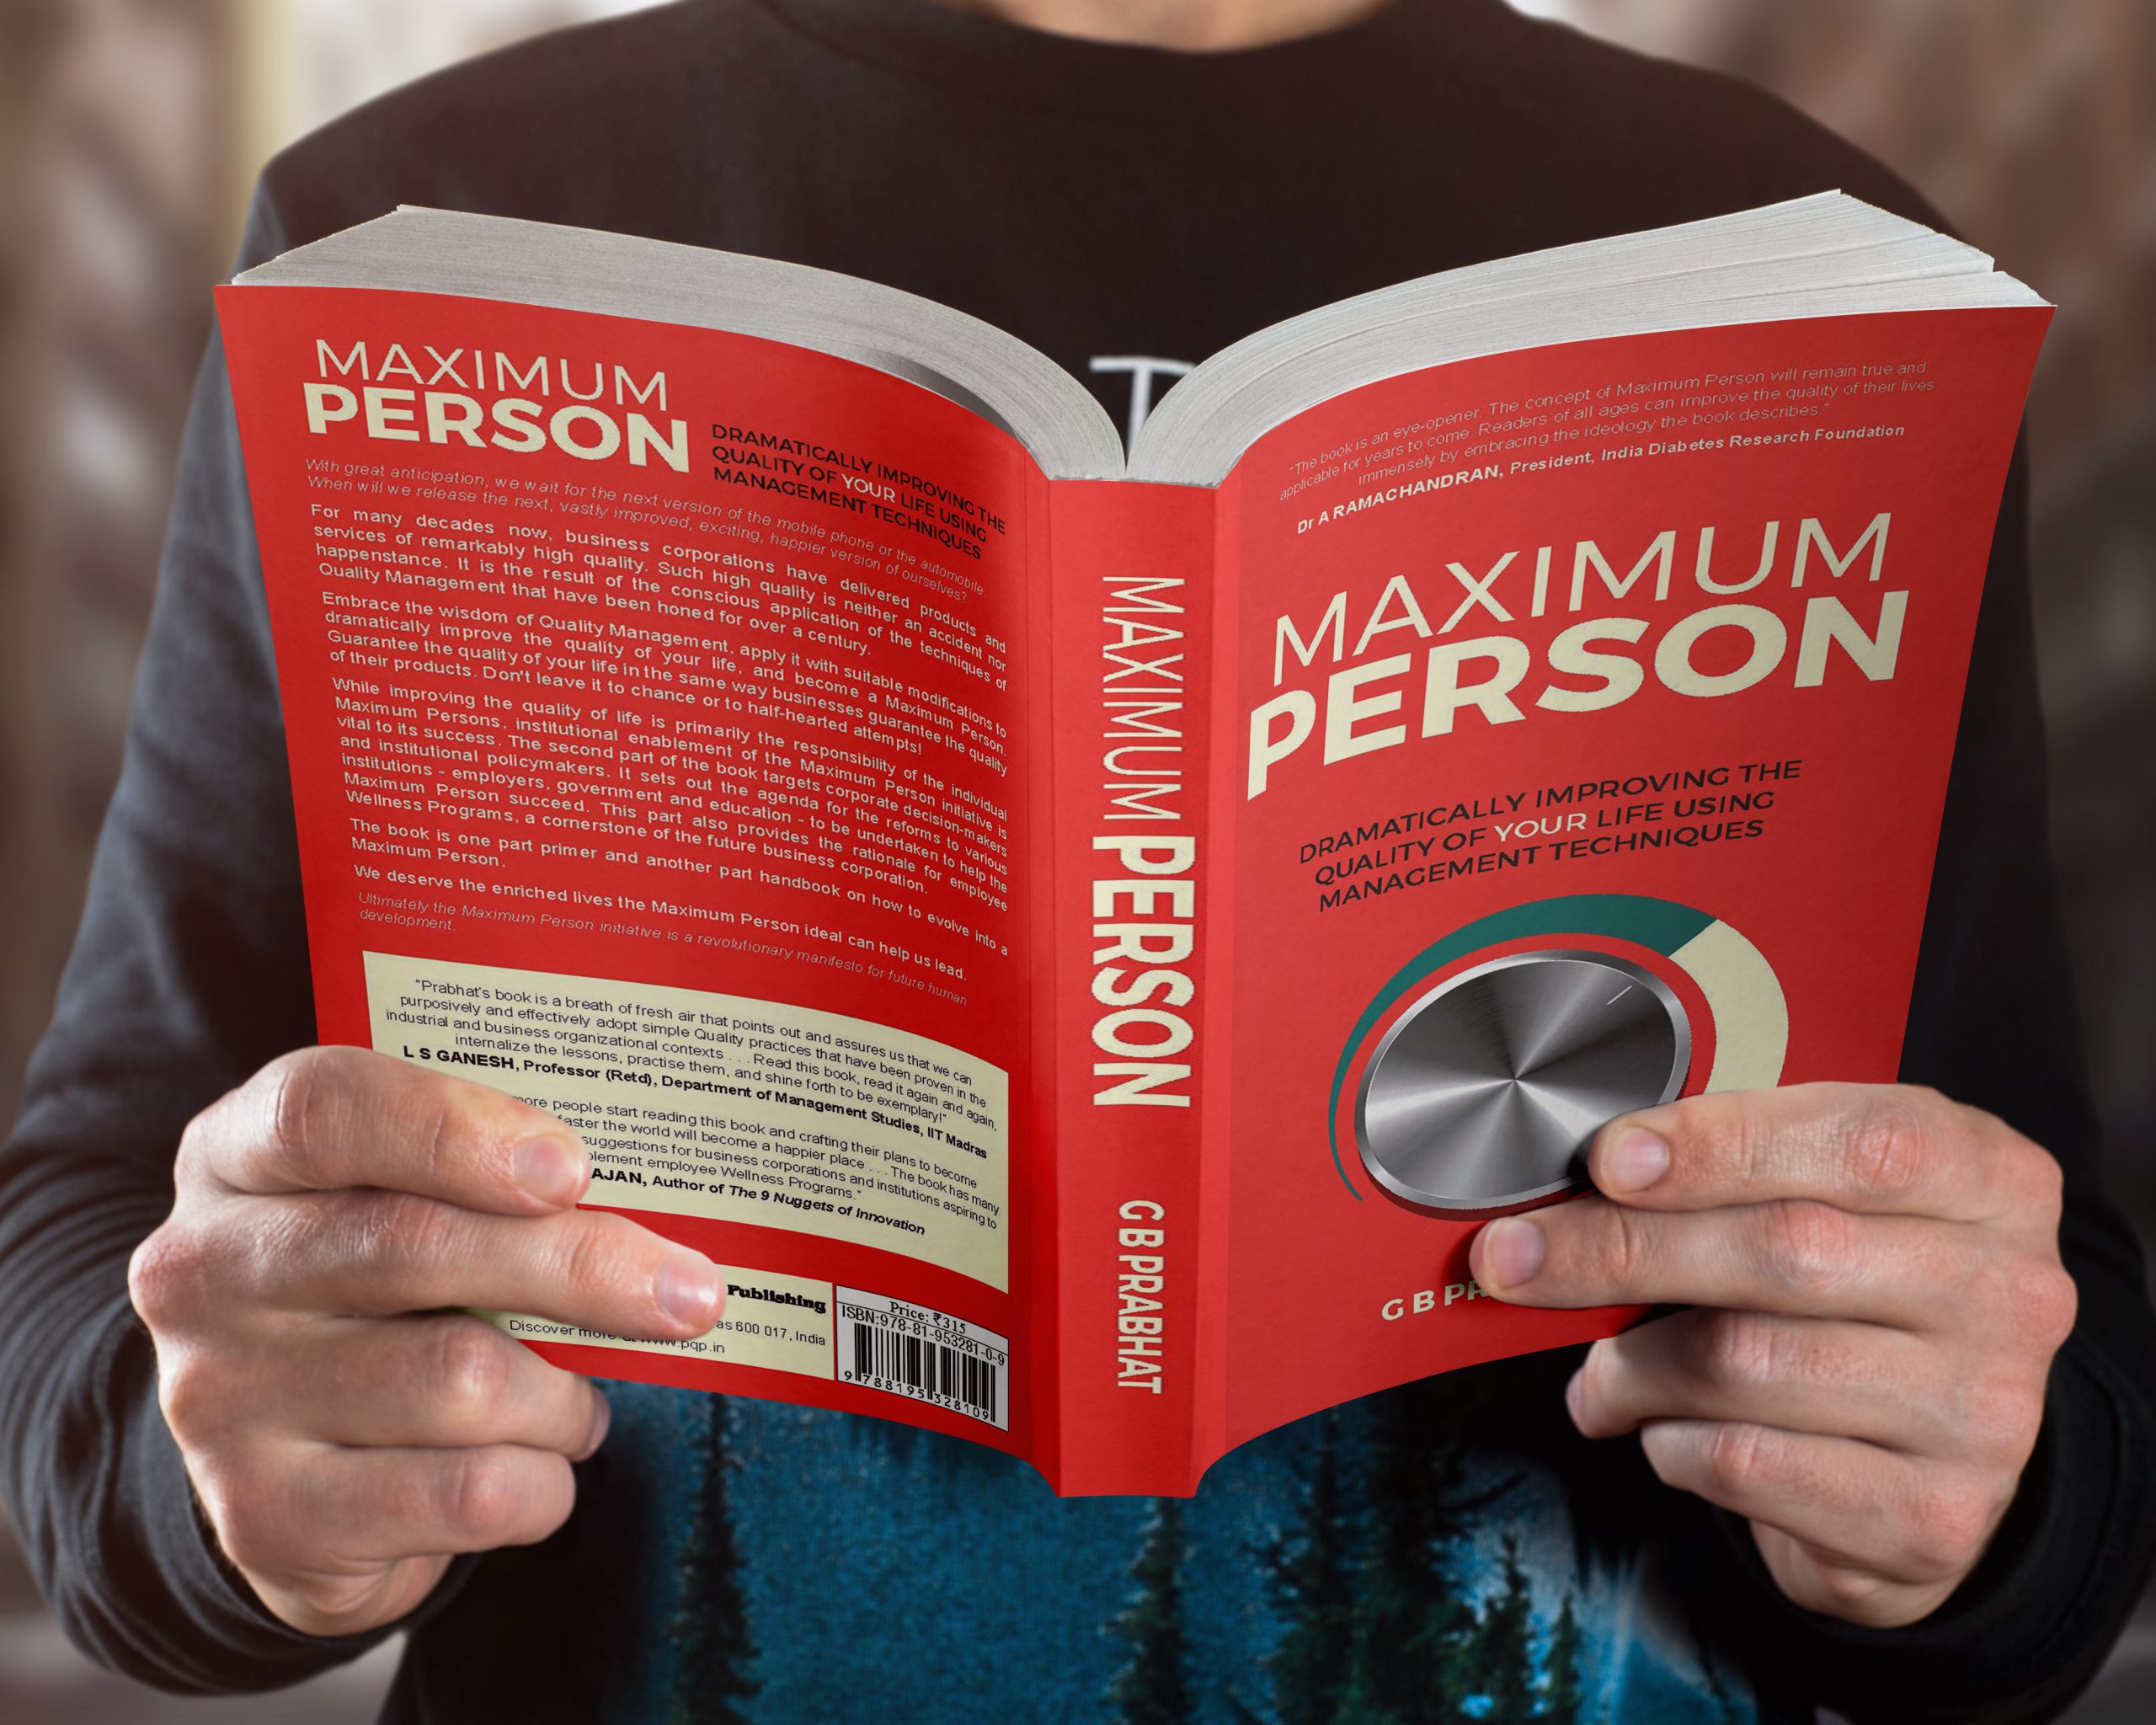 Book Review - Maximum Person by G B Prabhat